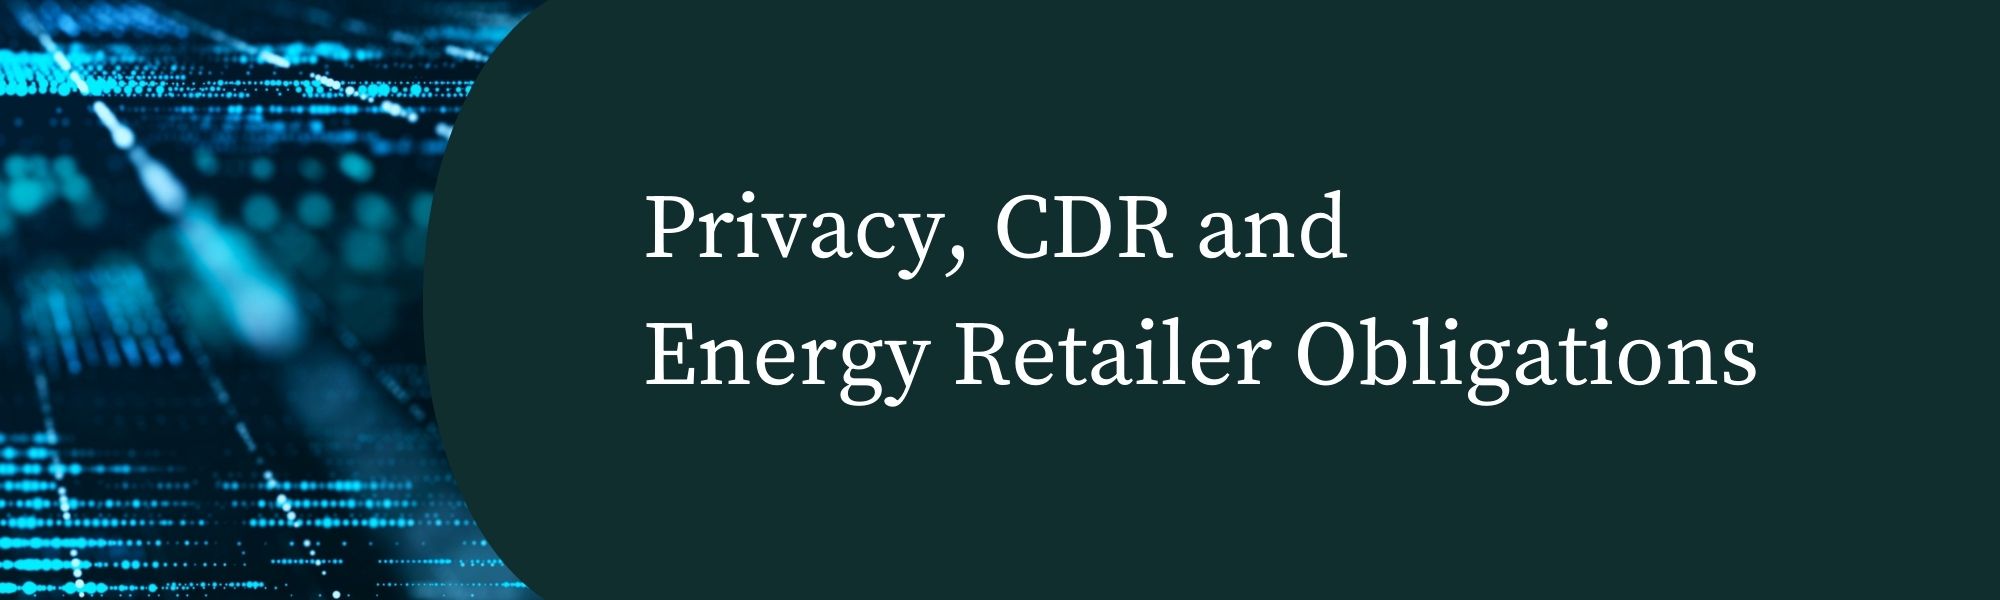 Privacy, CDR, and Energy Retailer Obligations